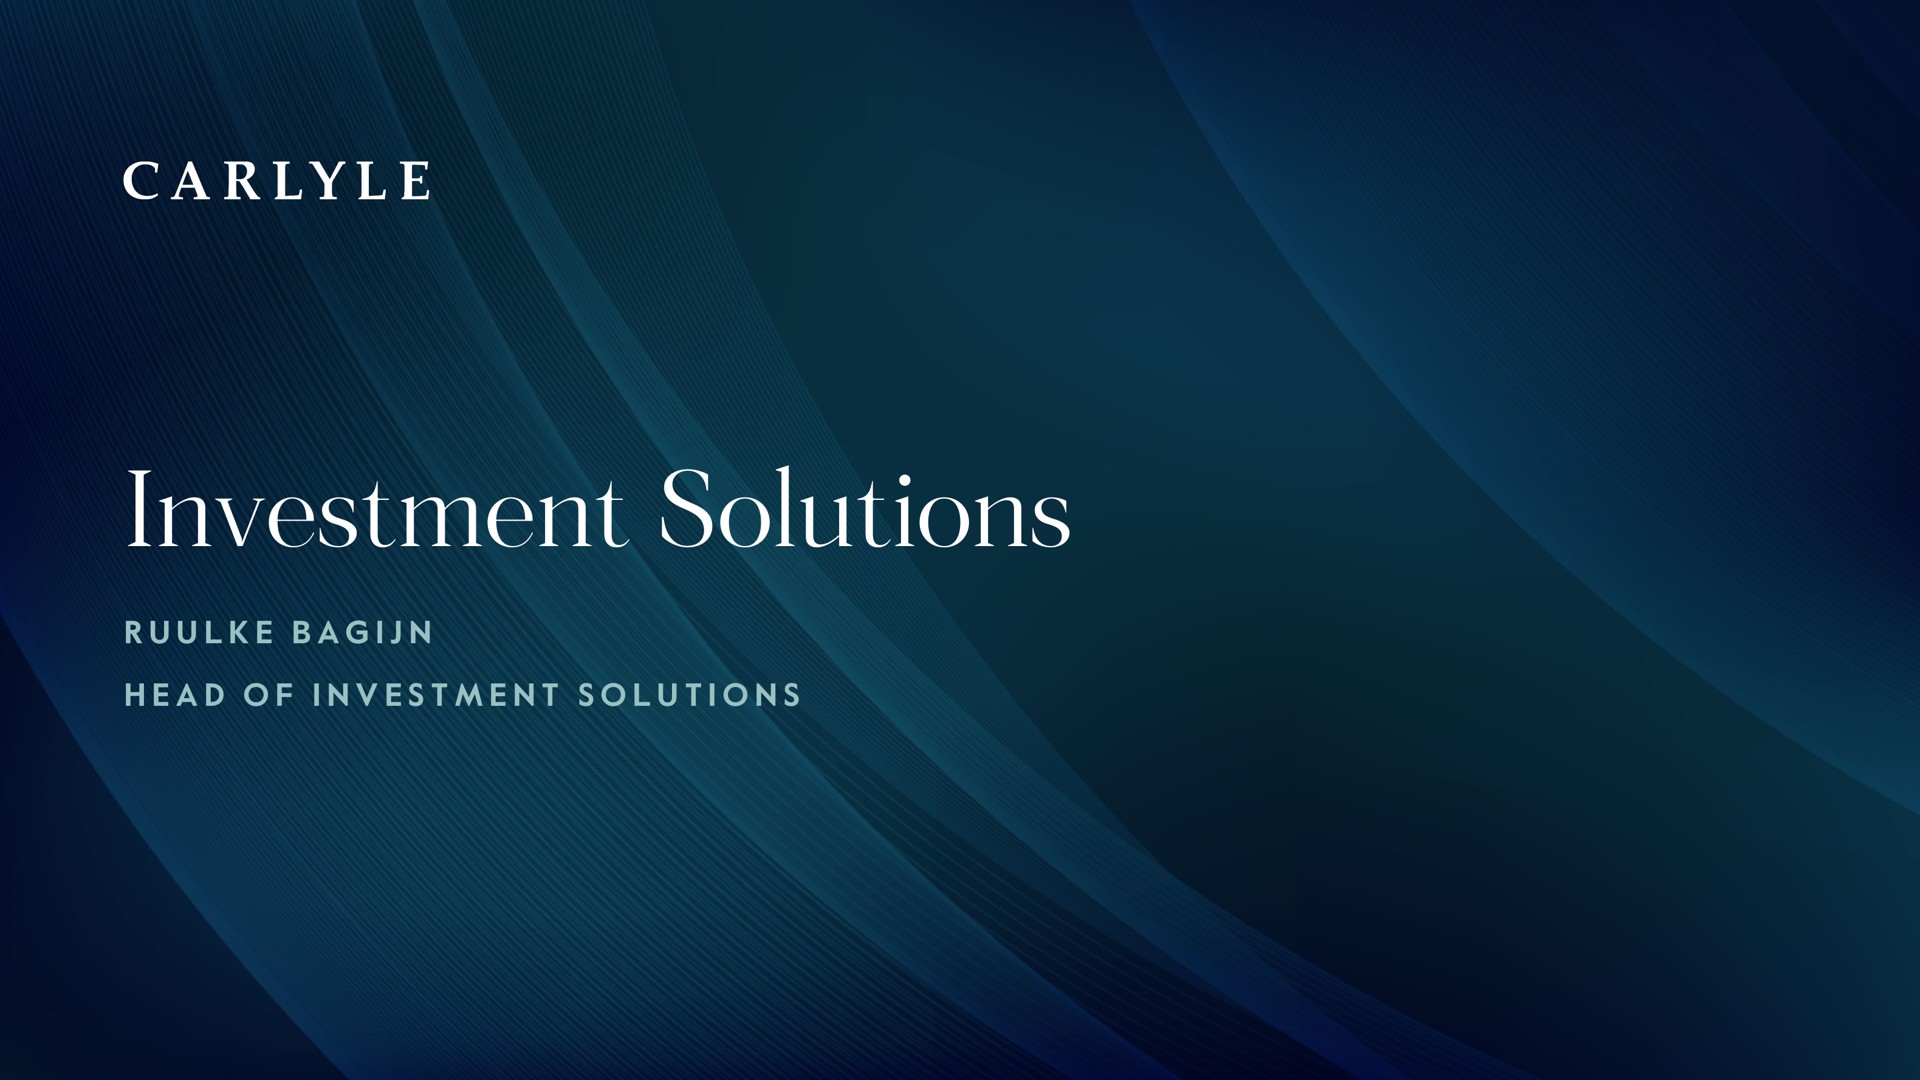 investment solutions | Carlyle